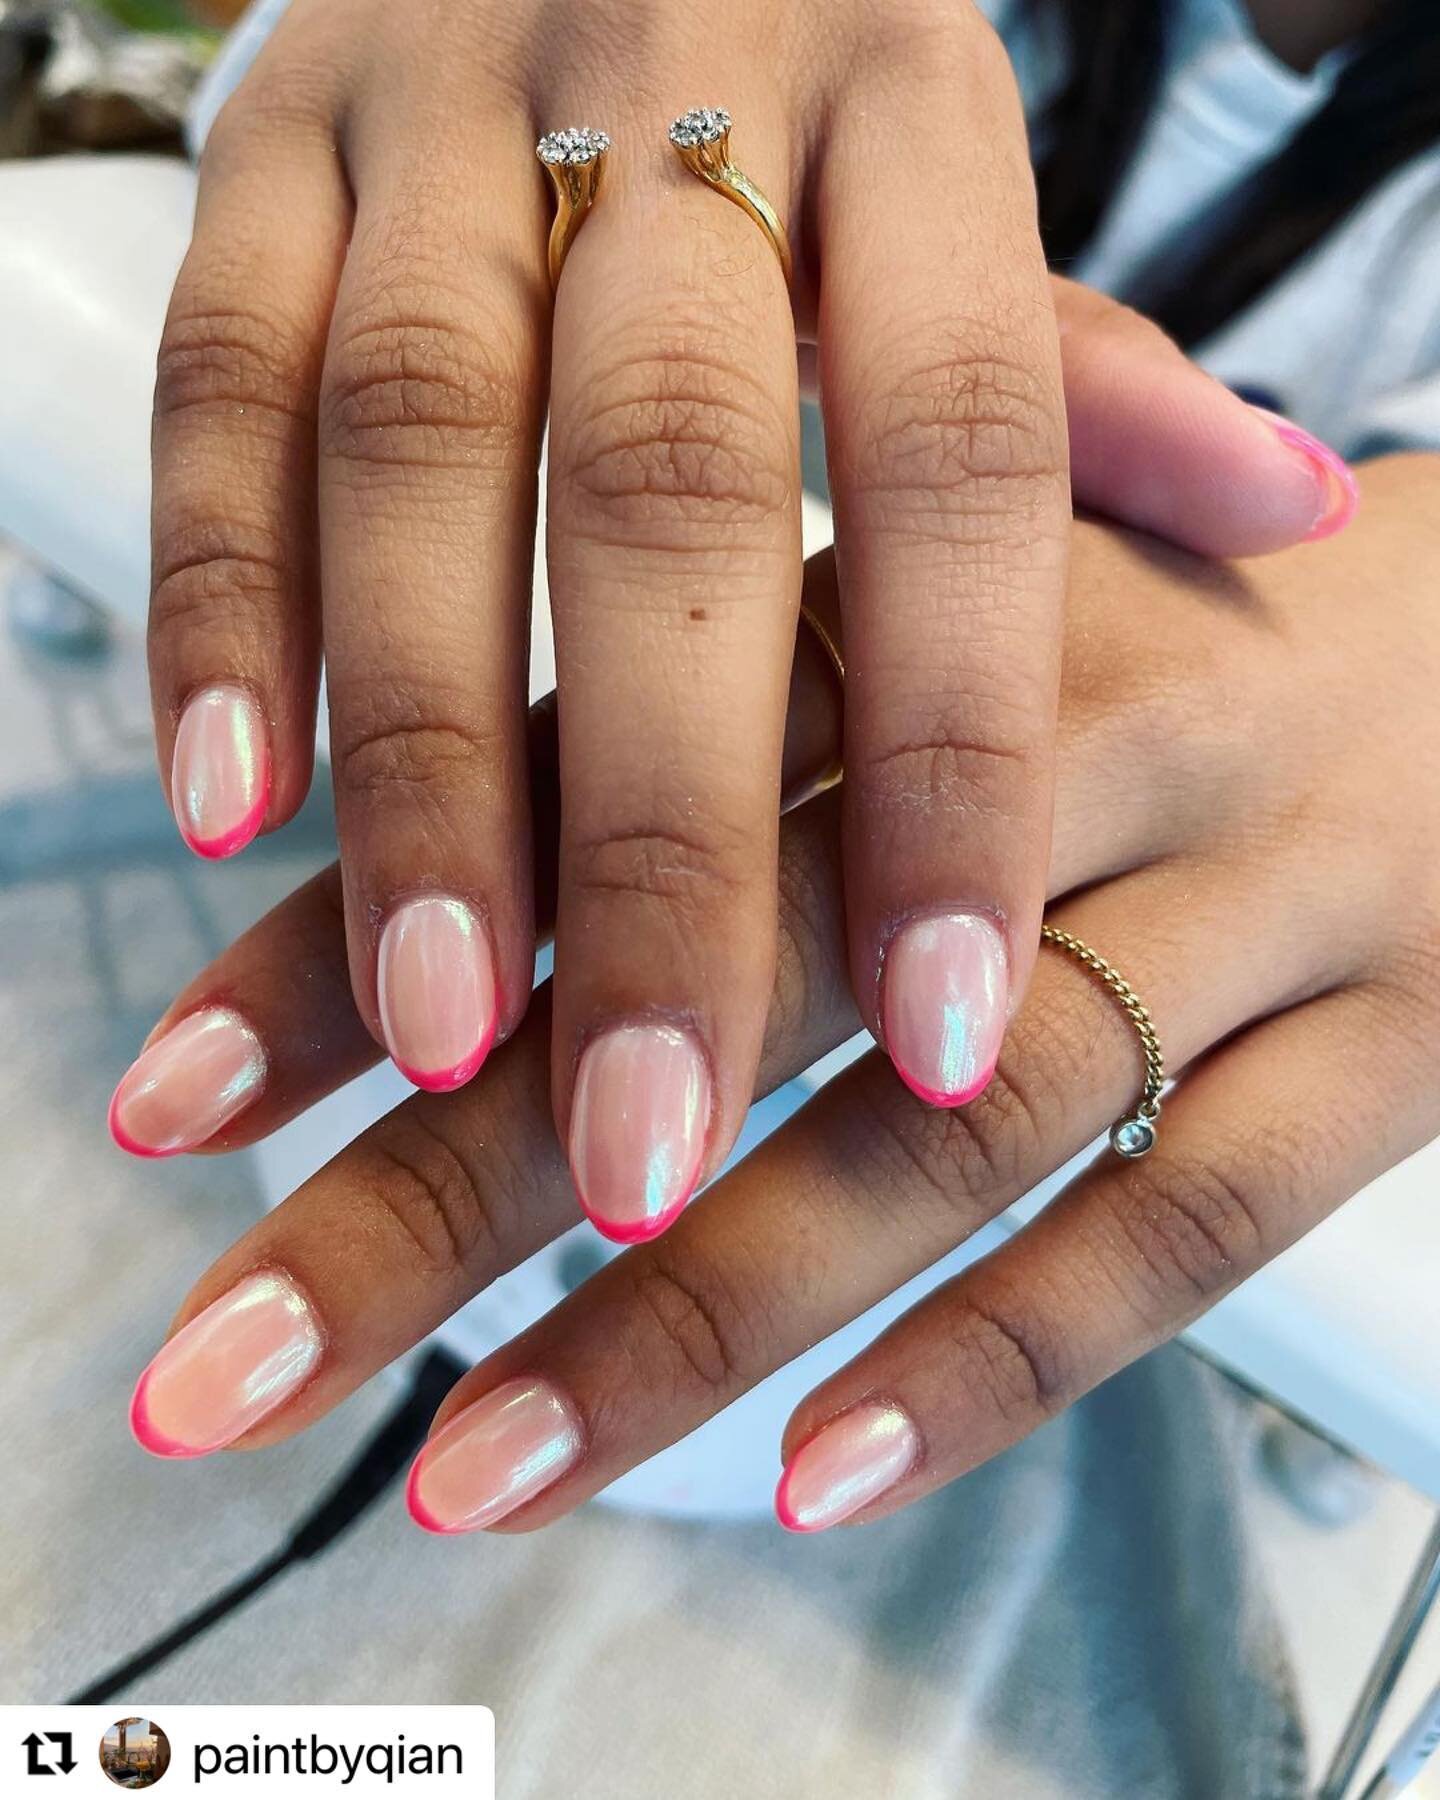 #Repost @paintbyqian with @use.repost
・・・
When chrome powder meeting with neon pink 💅 

#refinenailsandspa #seattlenails #seattle #nails #chromenails #slu